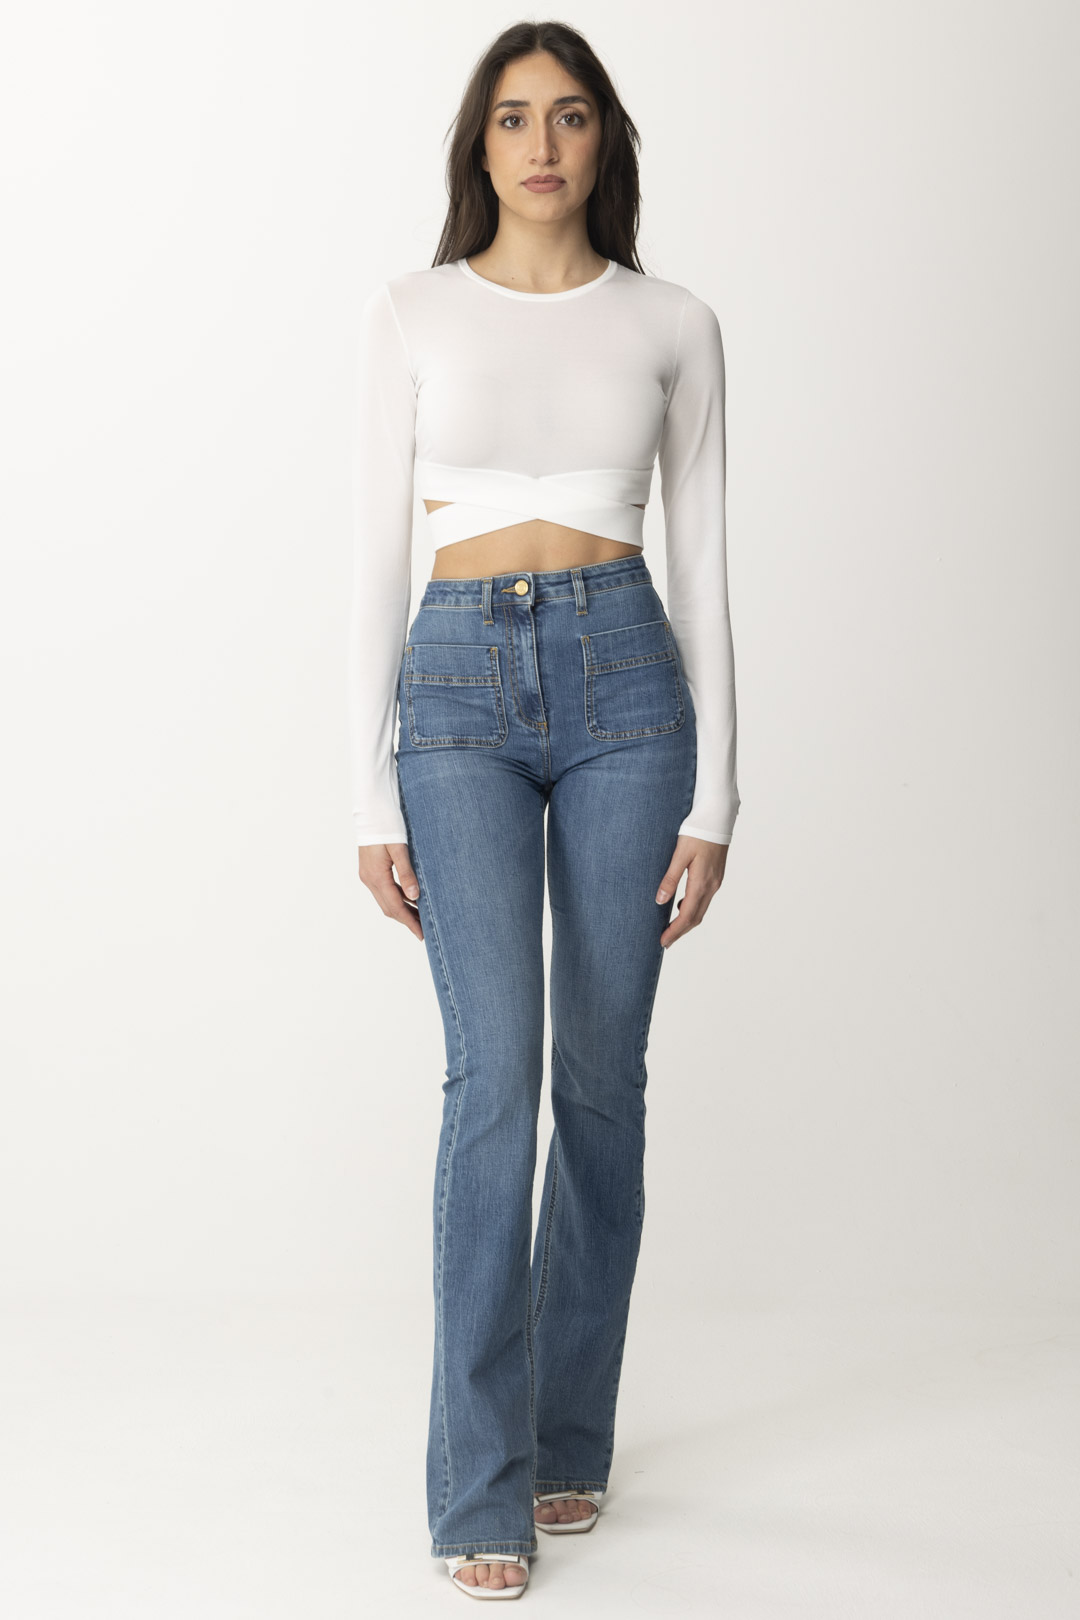 Preview: Elisabetta Franchi Knit Crop Top with Cut-Out Avorio